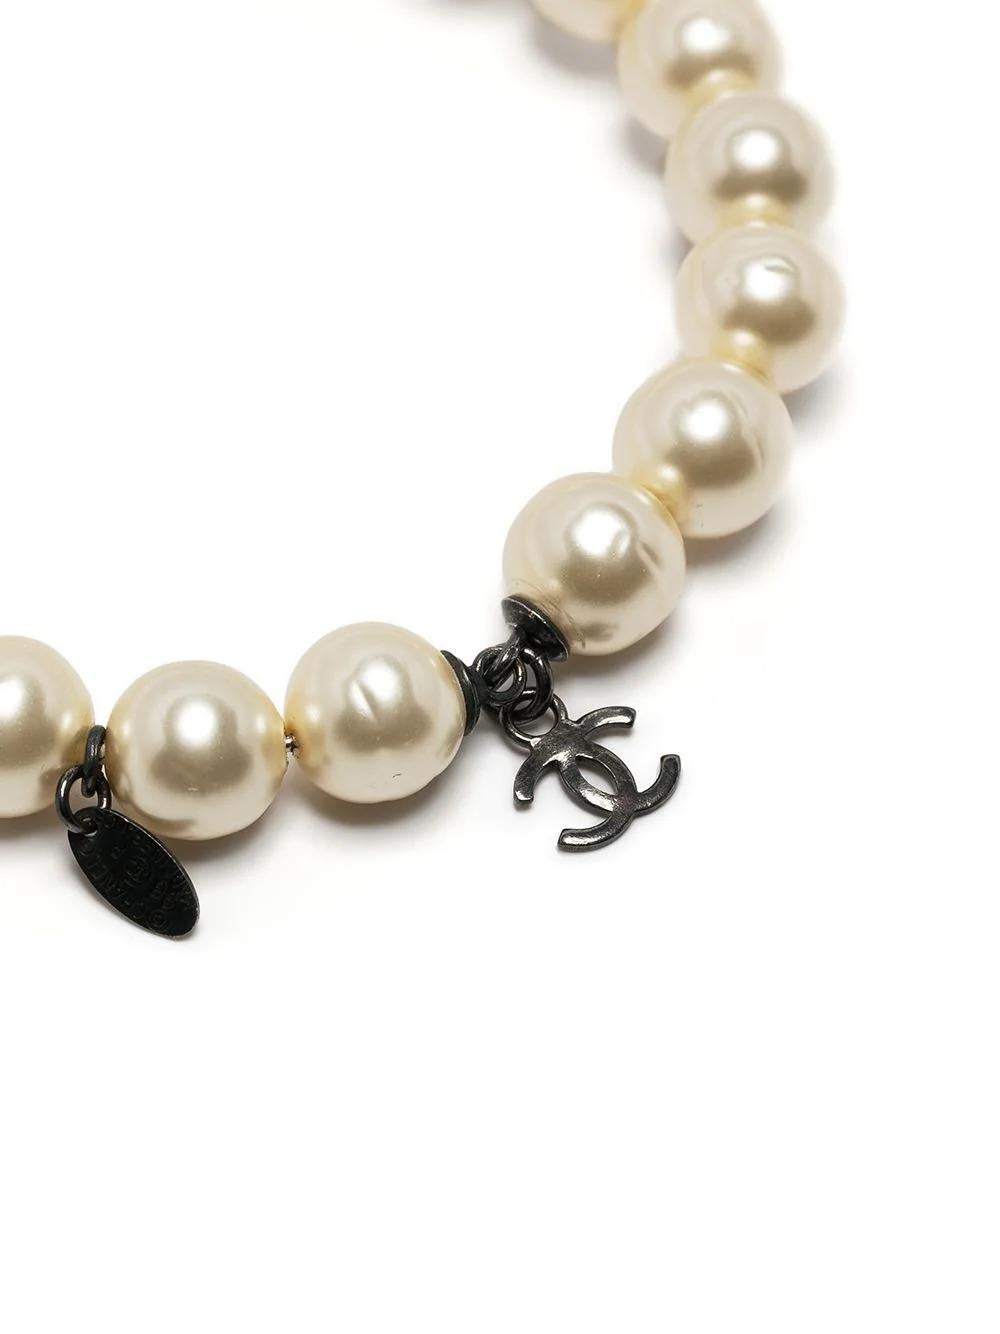 Adored by Coco Chanel, she believed pearls were all you needed to accessorize your outfit. Classic and timeless, this pre-owned pearl bracelet from the 1996 spring collection features a gunmetal grey 'CC' charm and a signature oval hangtag stamped